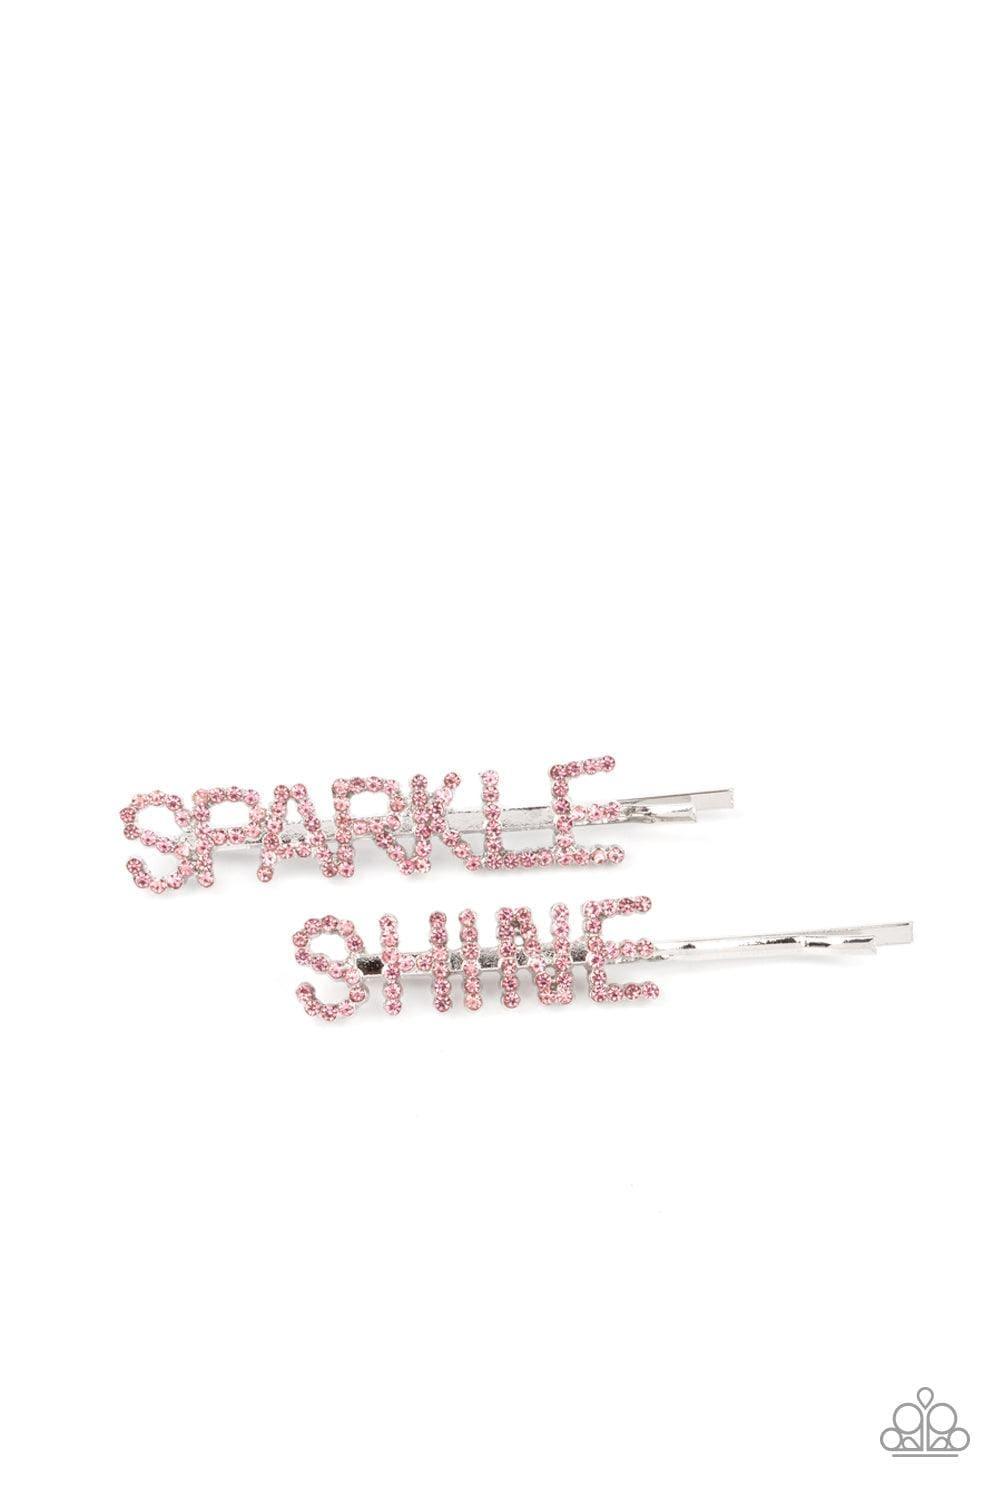 Paparazzi Accessories - Center Of The Sparkle-verse - Pink Hair Pins - Bling by JessieK